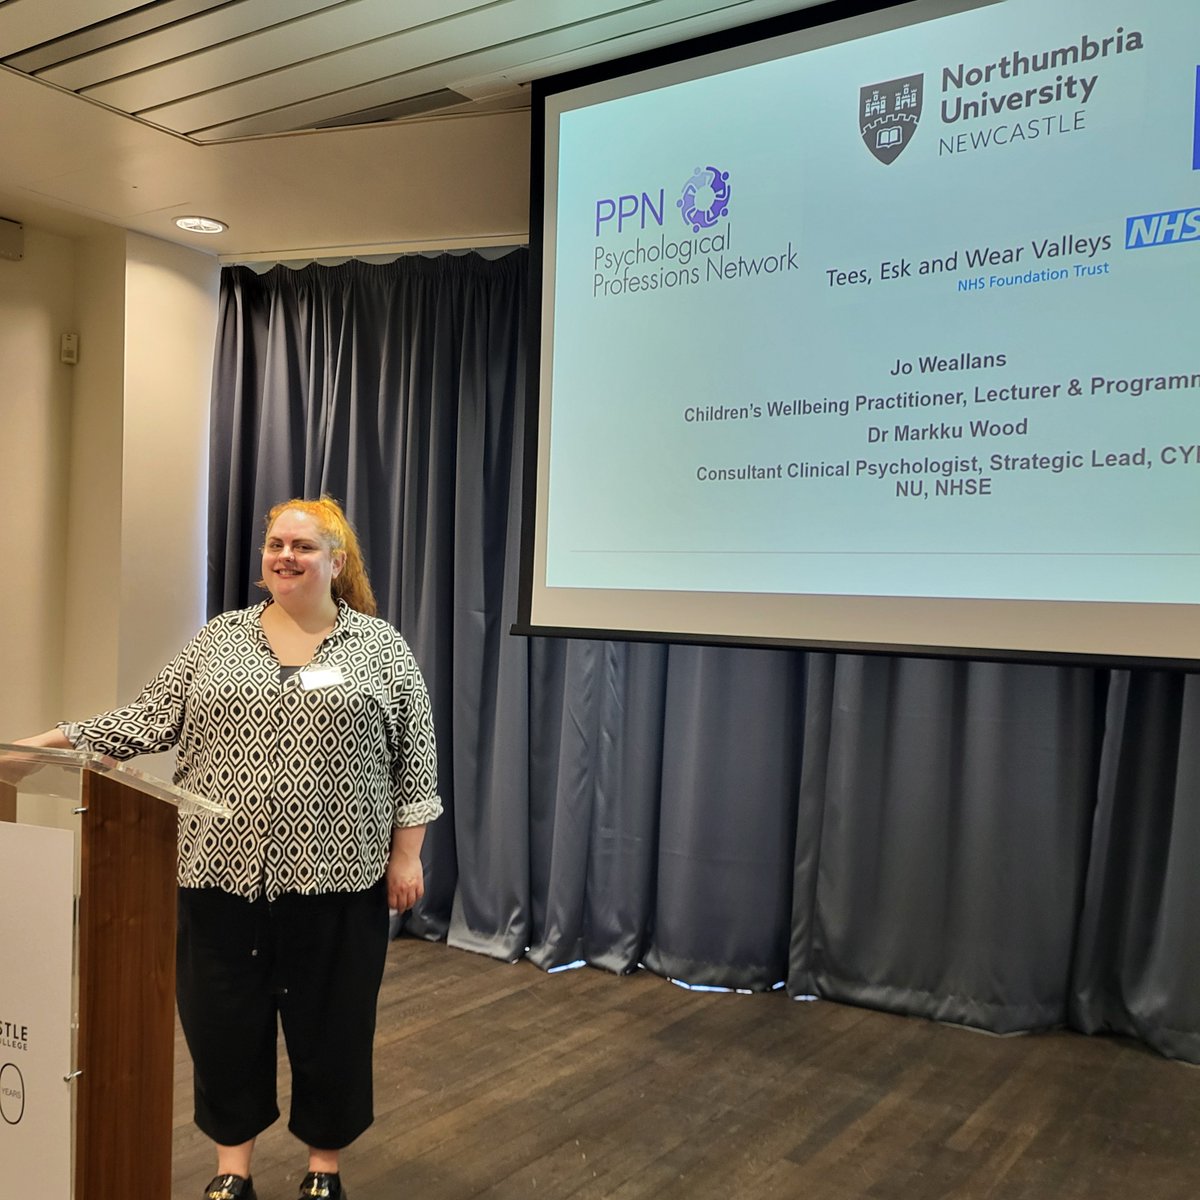 We would like to say a thank you to Jo Wealans, Dr Markku Wood, and Jacqui Dixon, from @NENC_NHS joining us for last week's 'Workforce Psychology' #FuturesFriday session. Read full story: bit.ly/4a9A6BE #GoFurther